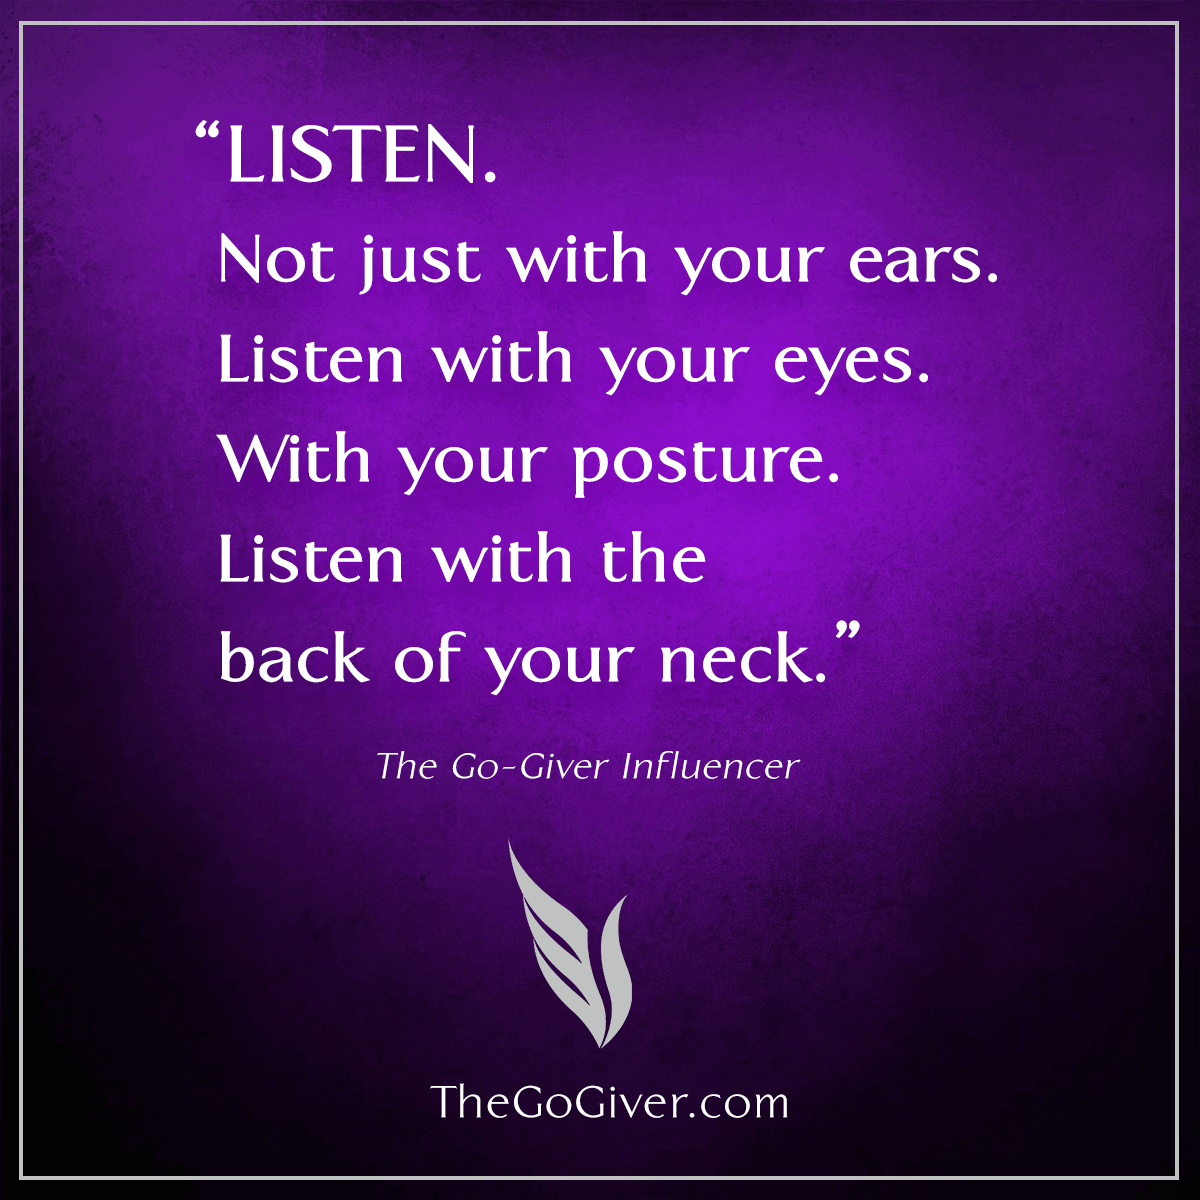 LISTEN. Not just with your ears. Listen with your eyes. With your posture. Listen with the back of your neck.